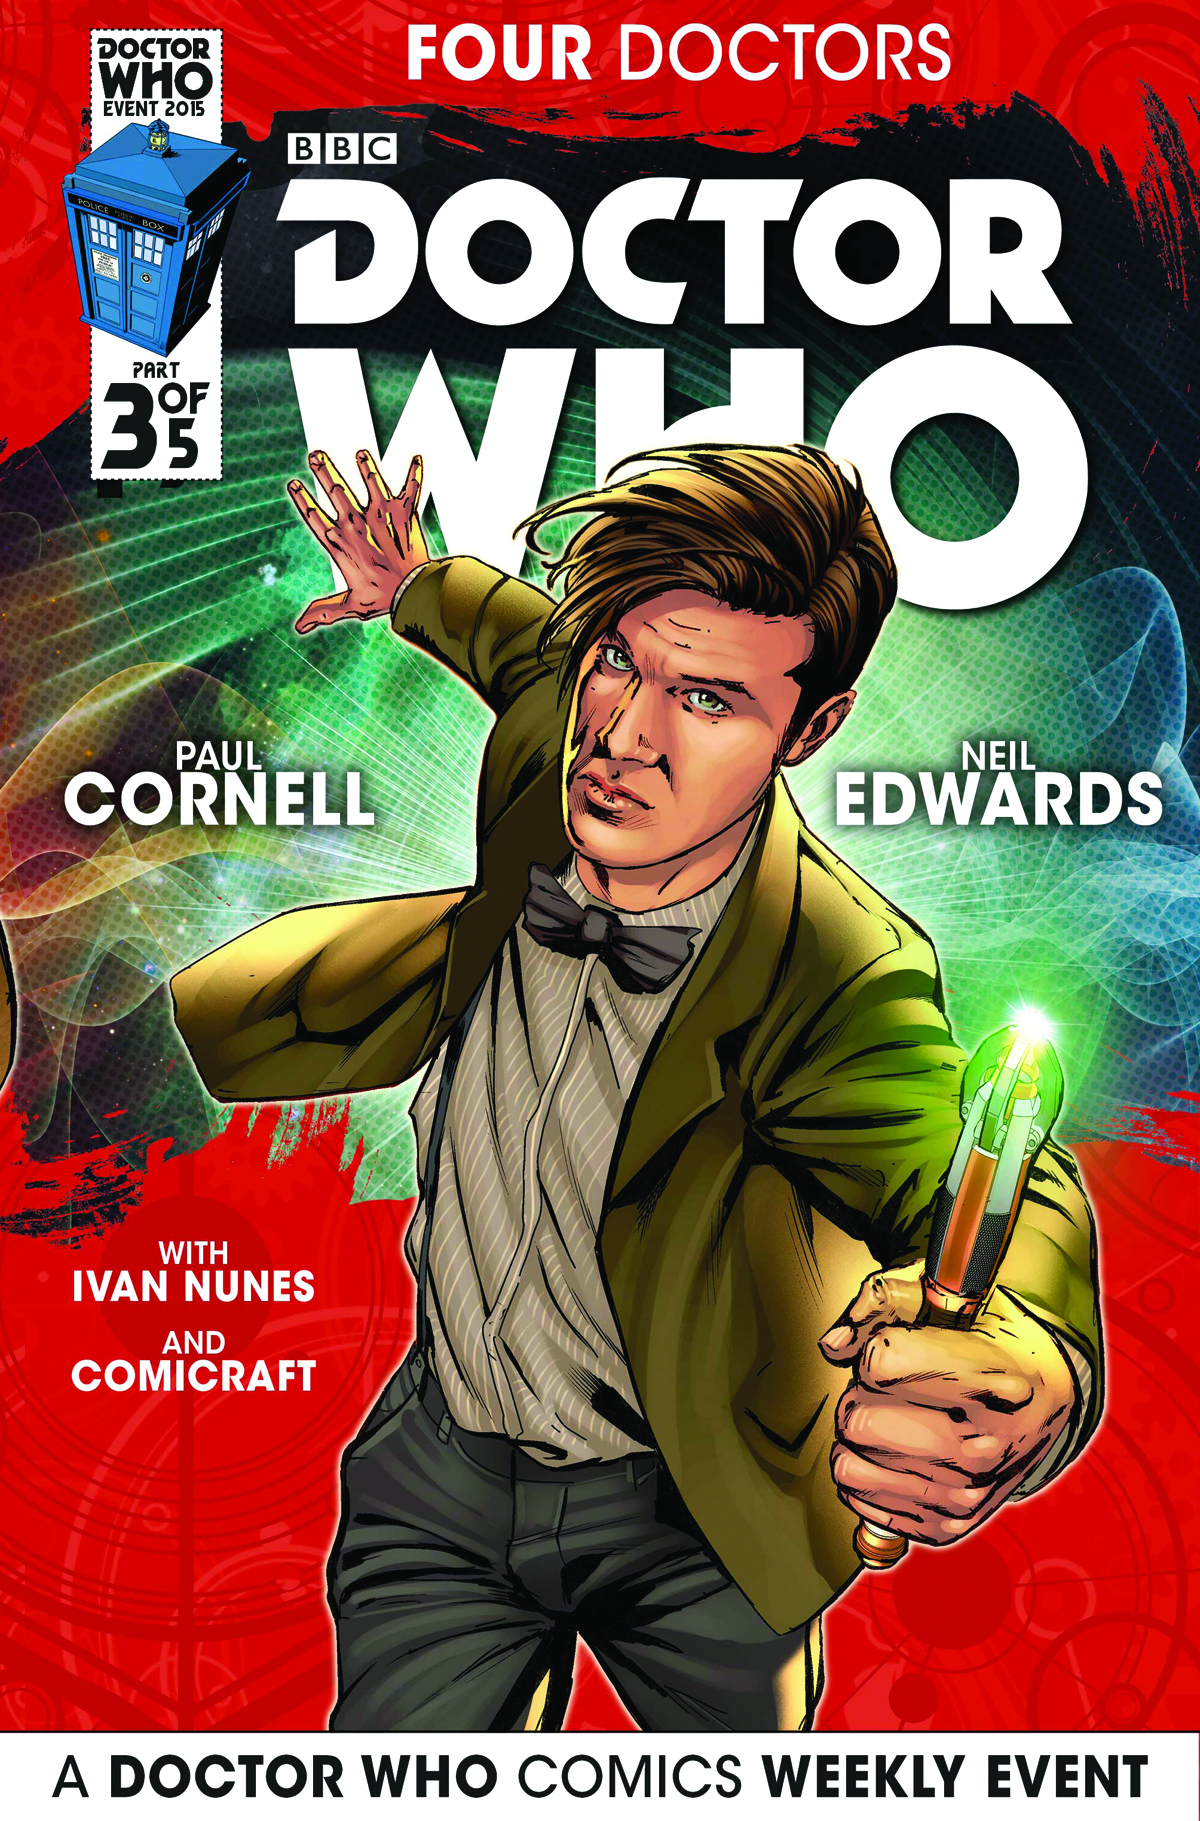 DOCTOR WHO 2015 FOUR DOCTORS #3 (OF 5) REG EDWARDS